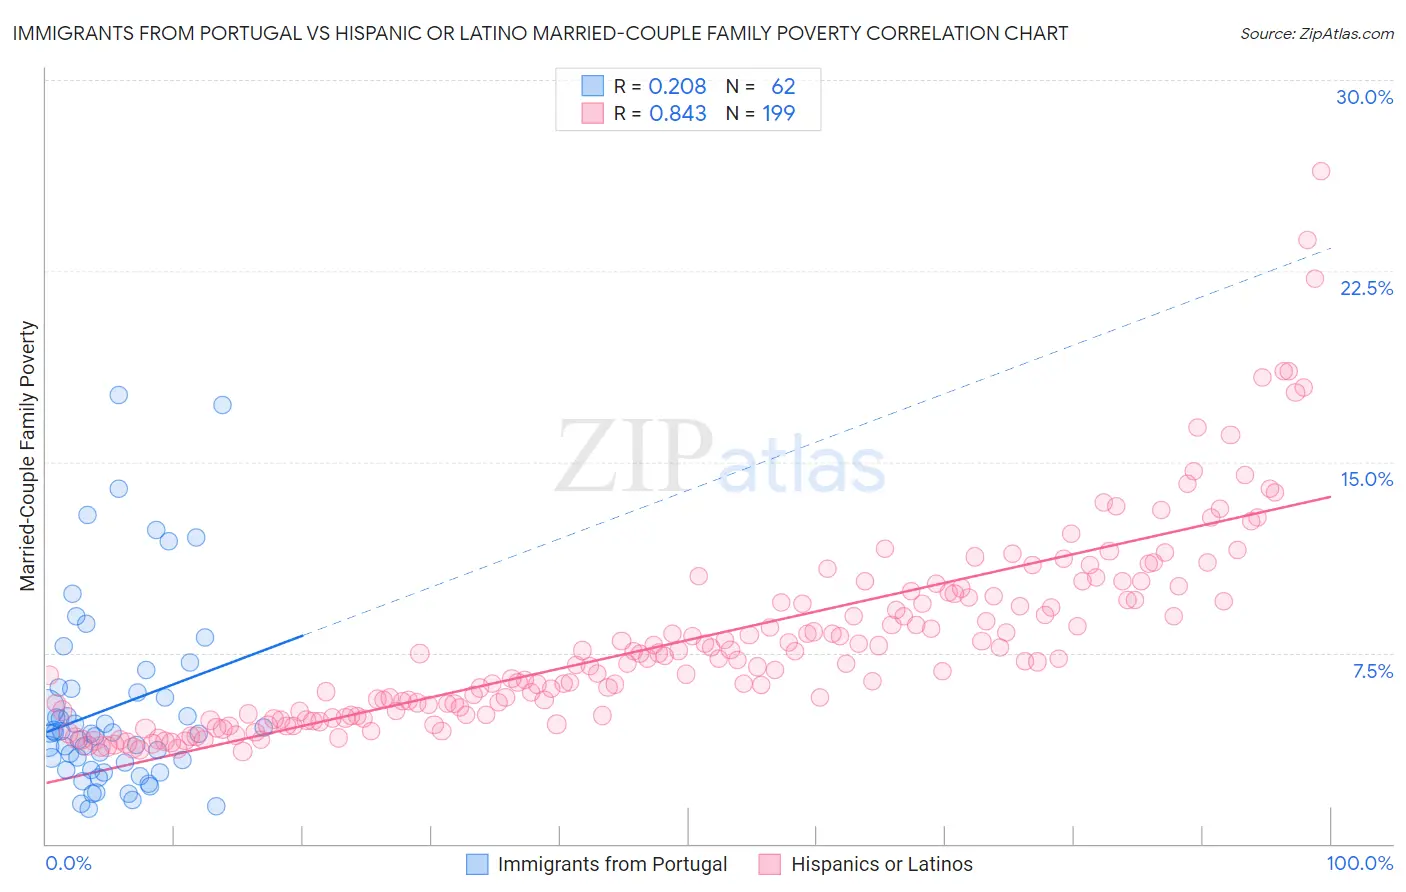 Immigrants from Portugal vs Hispanic or Latino Married-Couple Family Poverty